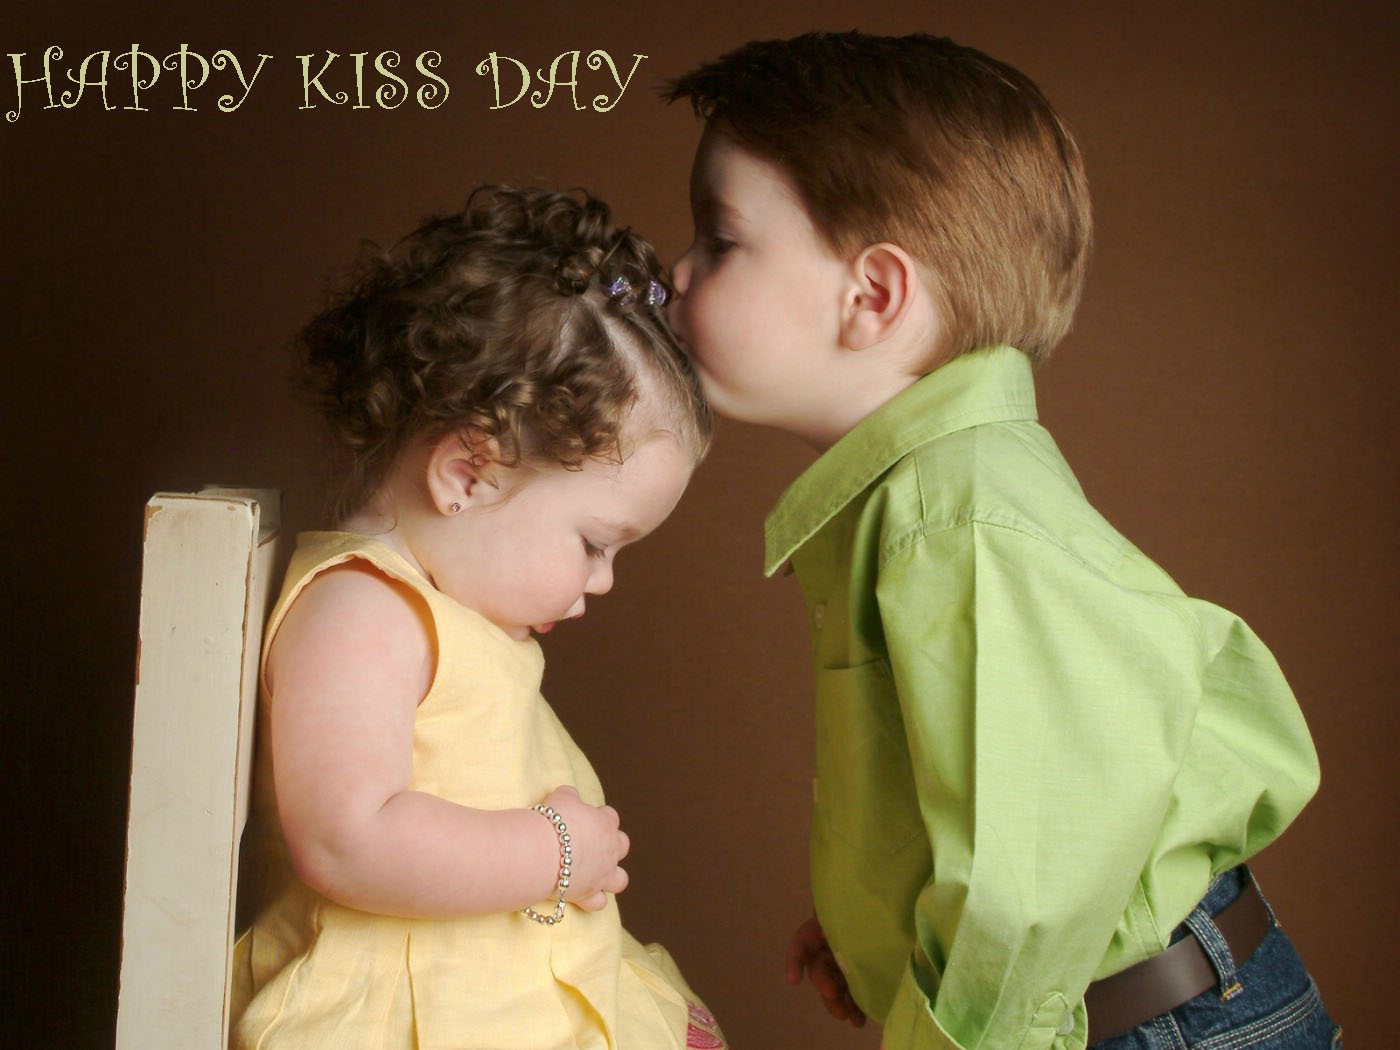 Happy Kiss Day cute kids kissing picture